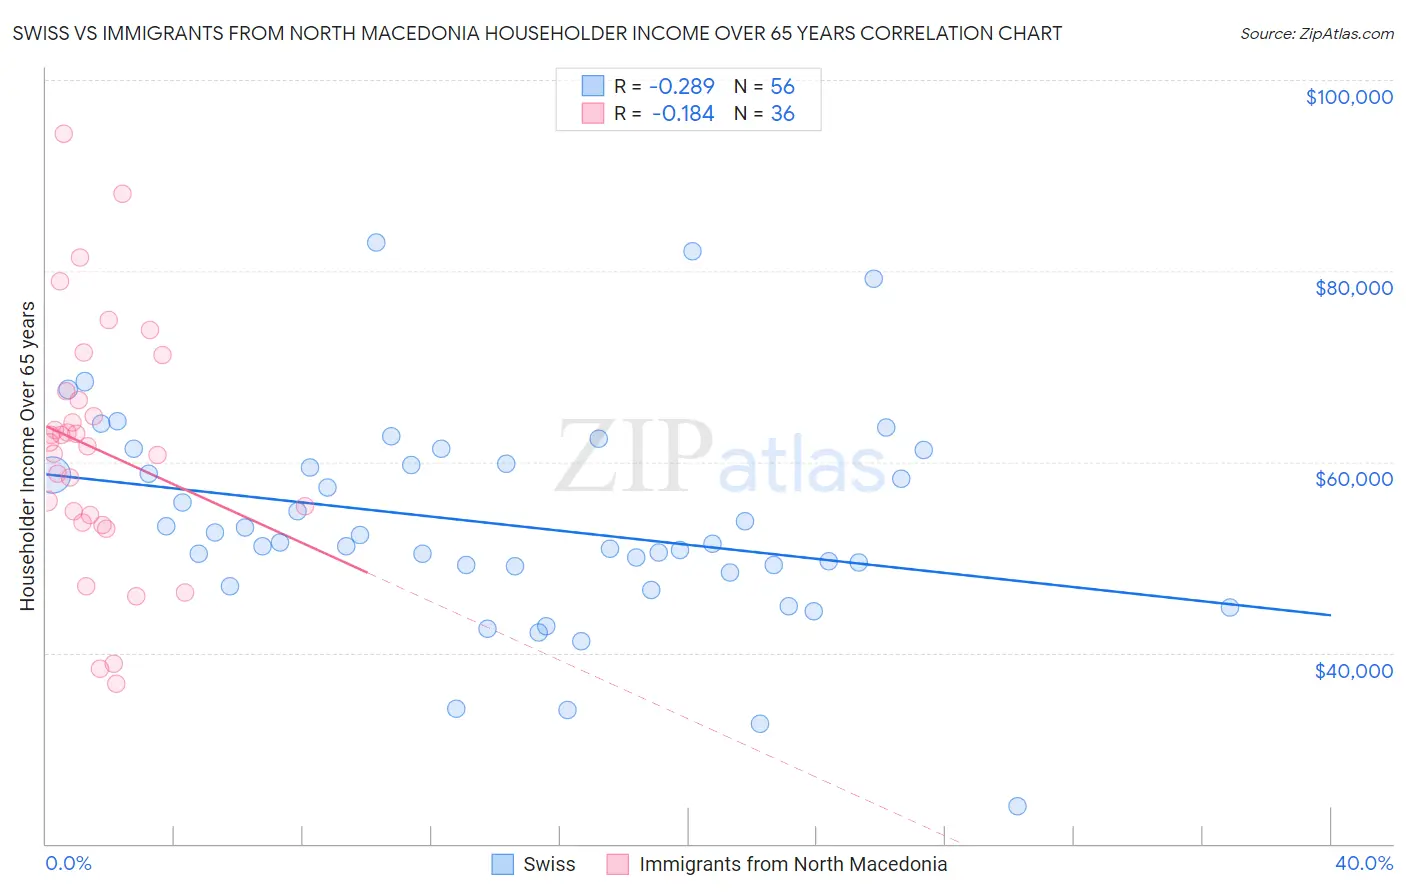 Swiss vs Immigrants from North Macedonia Householder Income Over 65 years